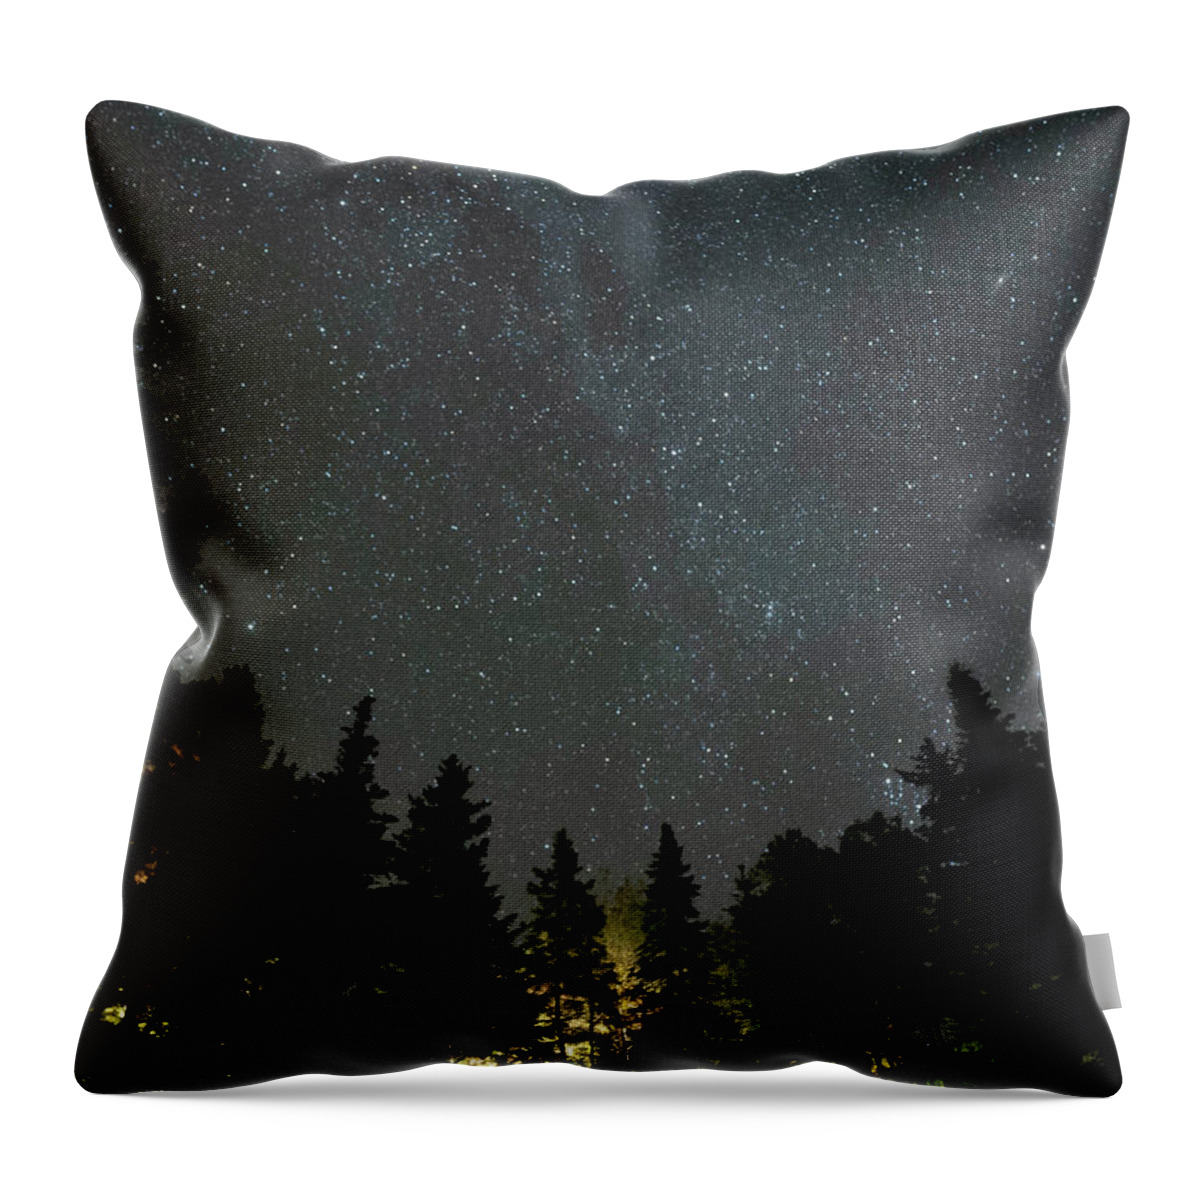 Milky Way Throw Pillow featuring the photograph Acadia Milky Way Glow by GeeLeesa